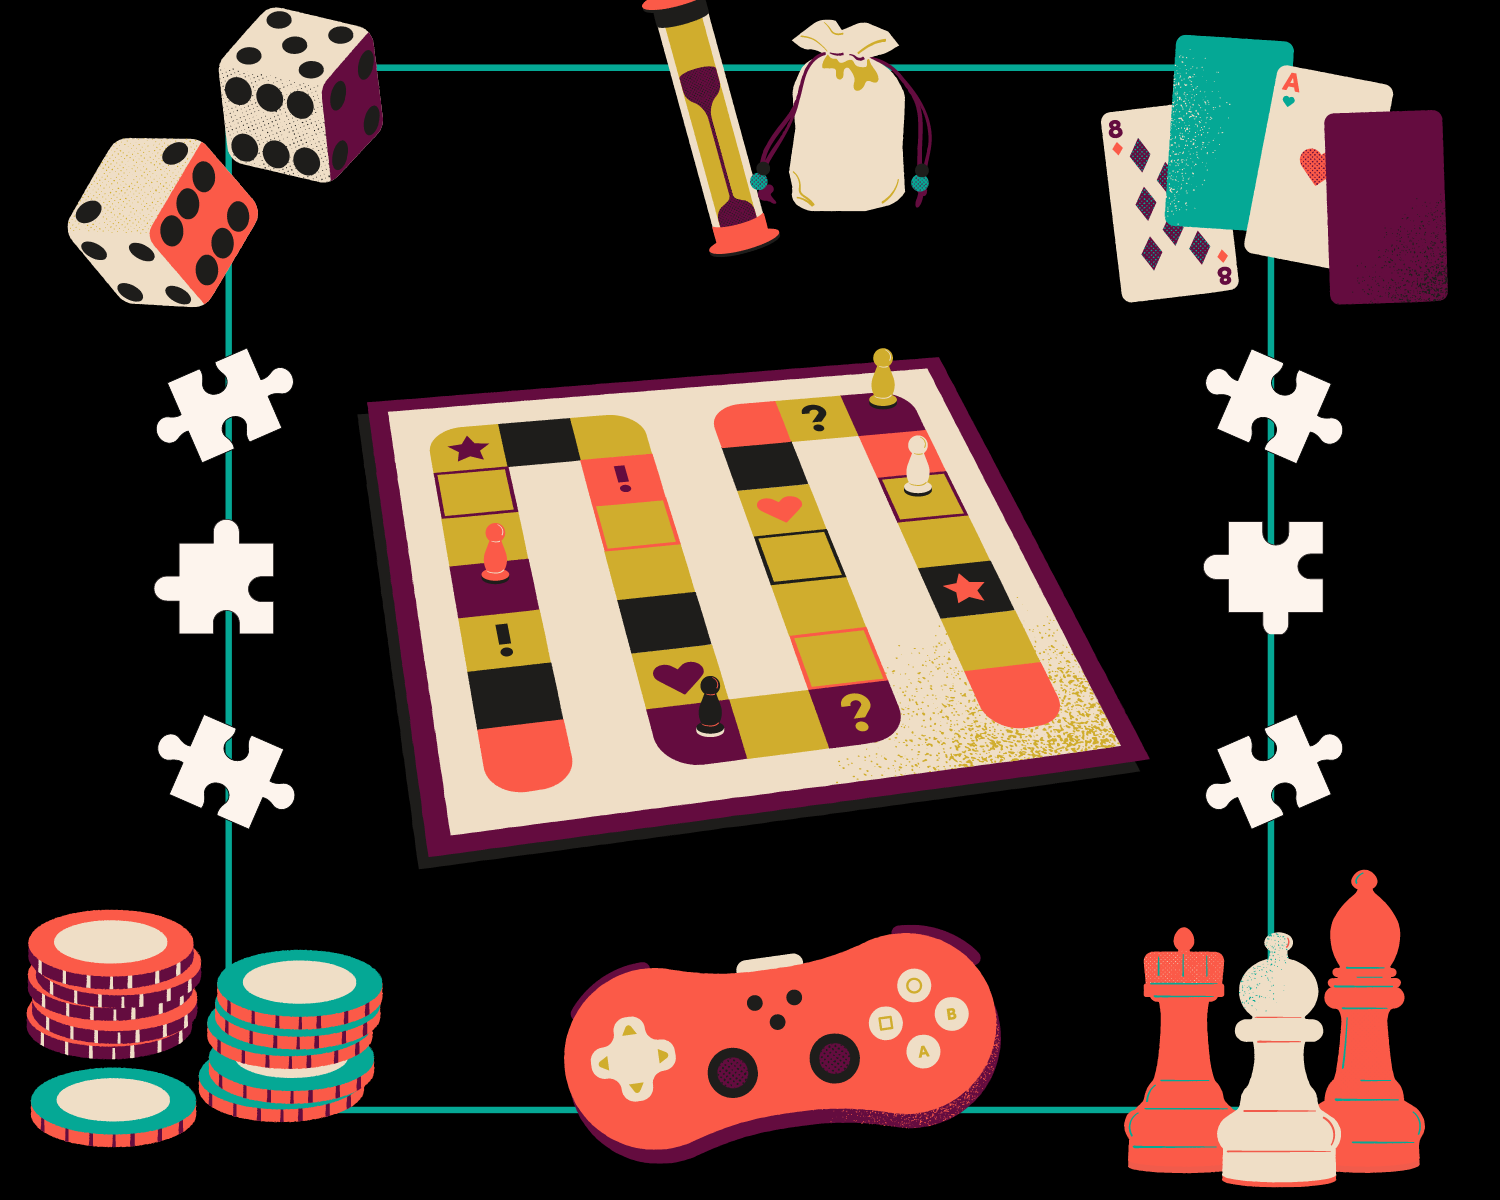 Various game elements, such as chips, cards, dice, pawns, puzzles